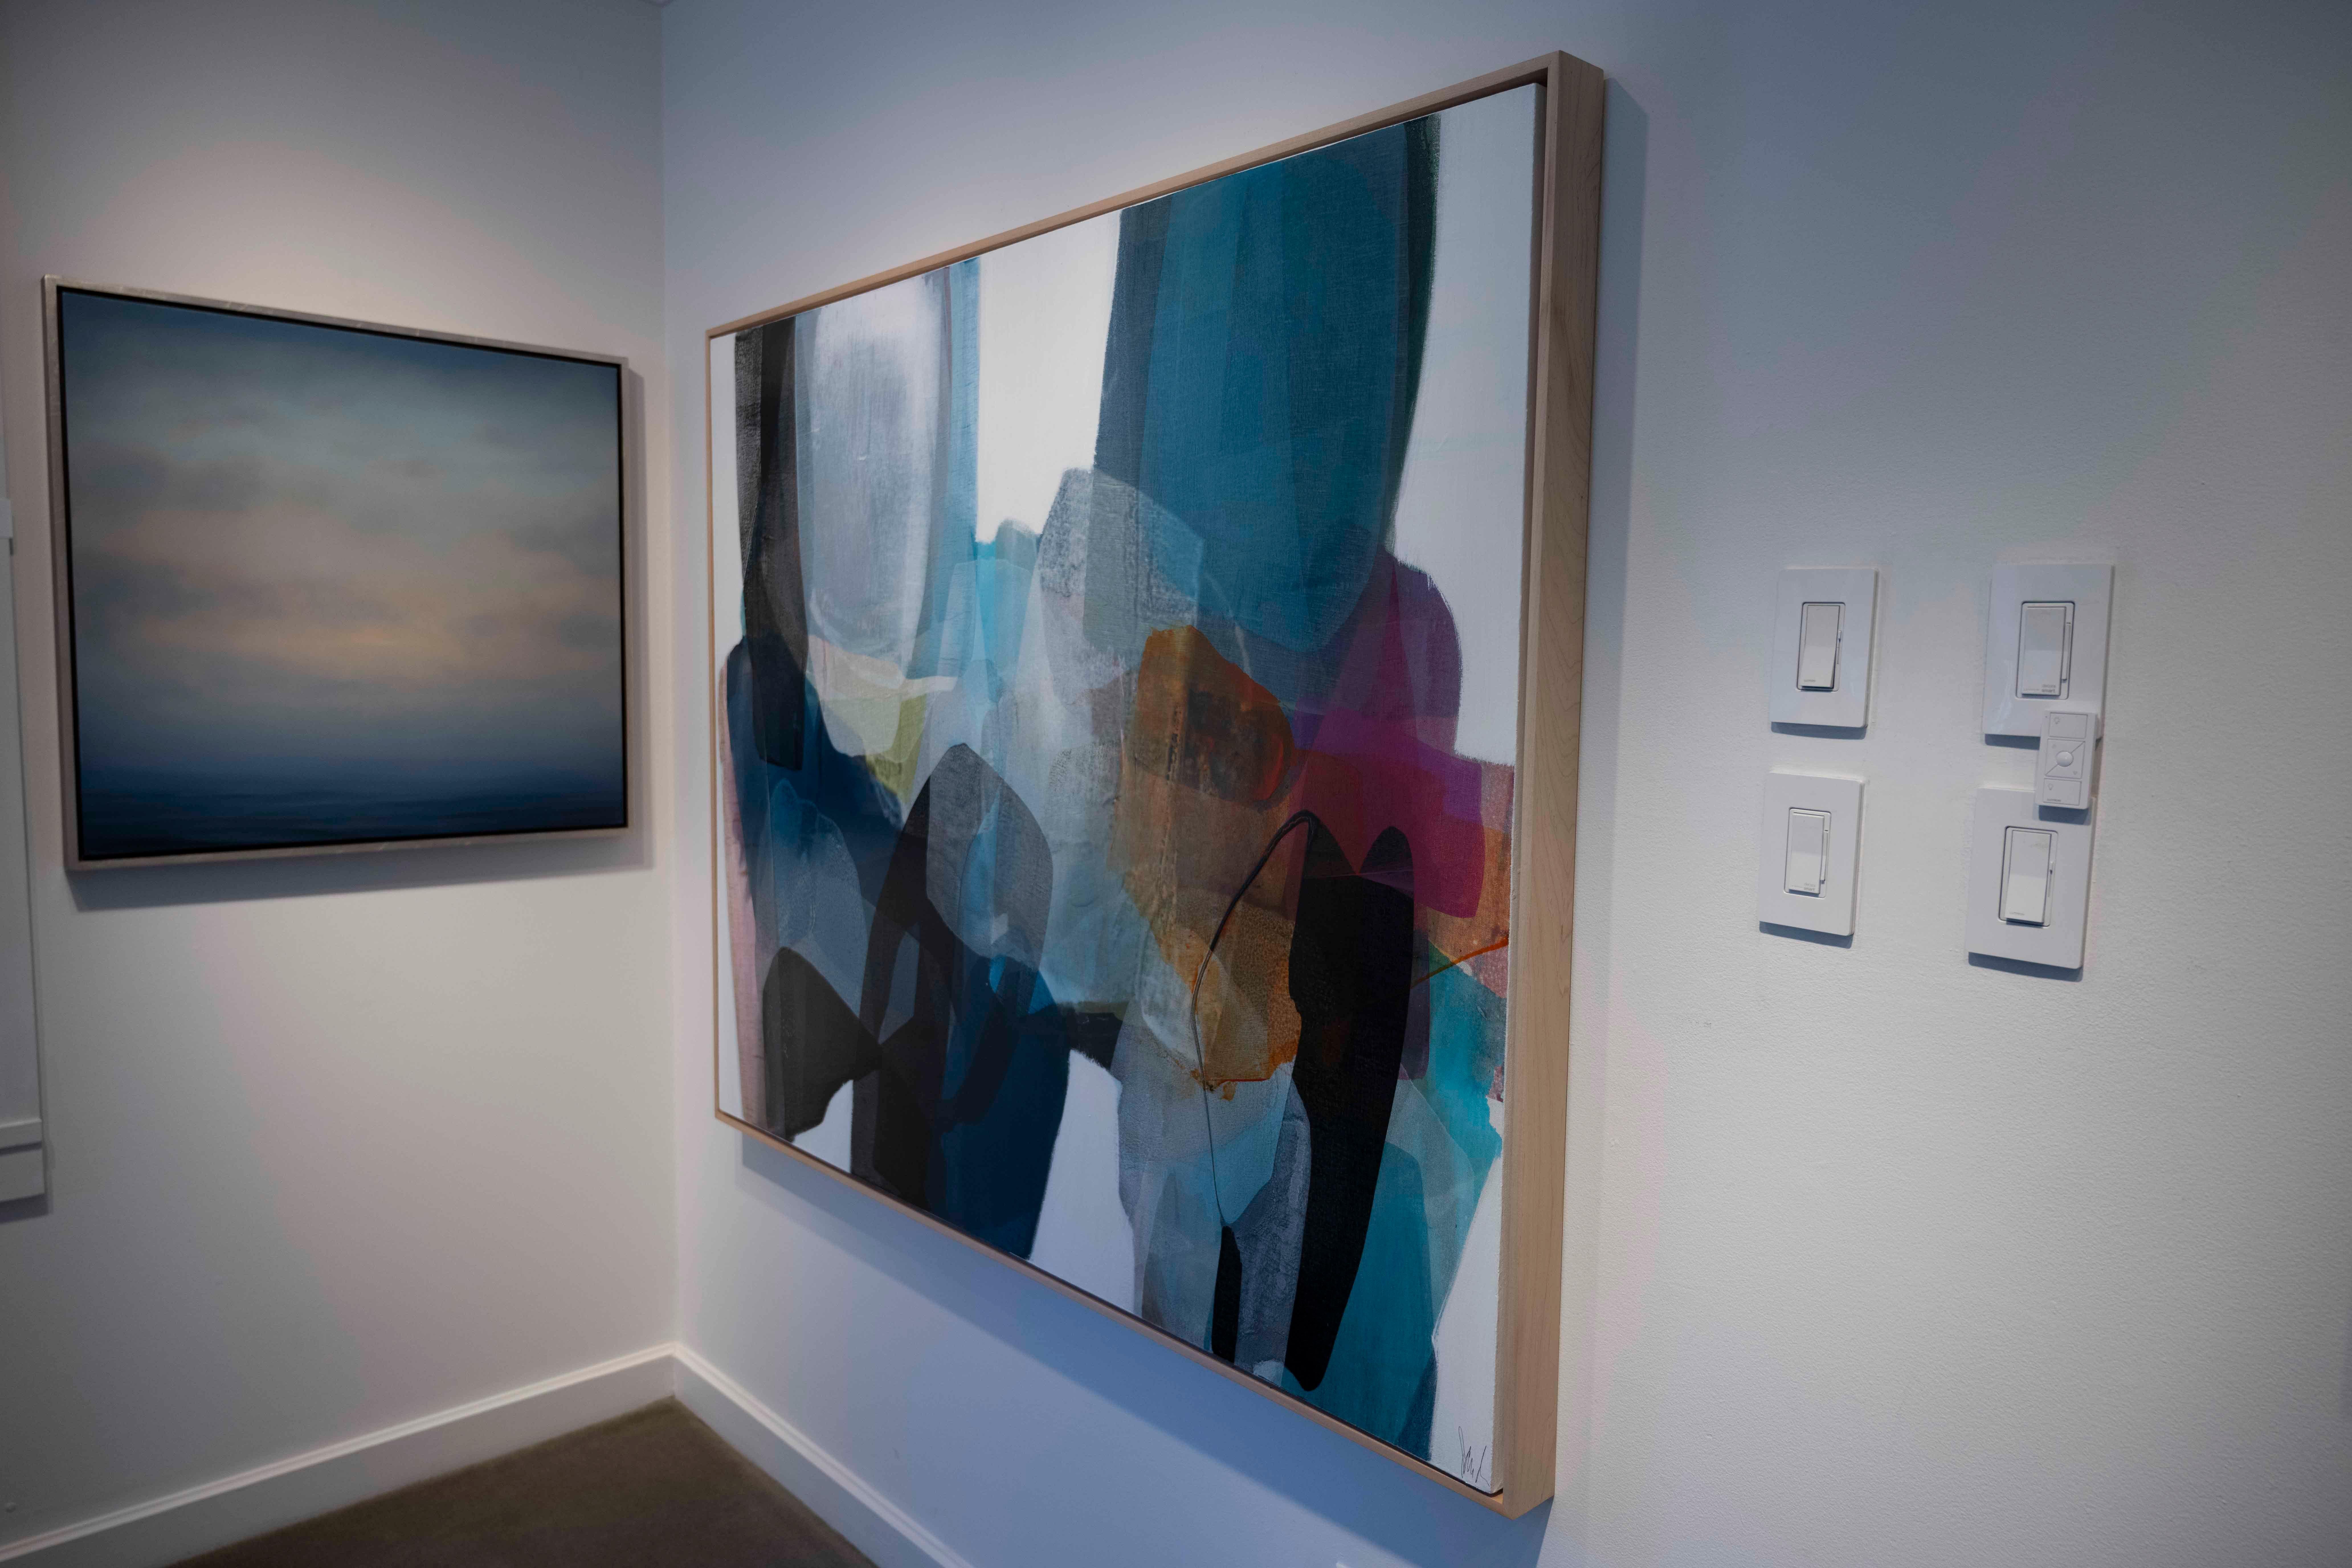 Lynn Sanders is an artist excited by beauty: architecture, foliage, landscapes, seascapes, interiors. She finds palettes and shapes in her environment and propels them into her work, believing in the power of art to stimulate a person’s environment